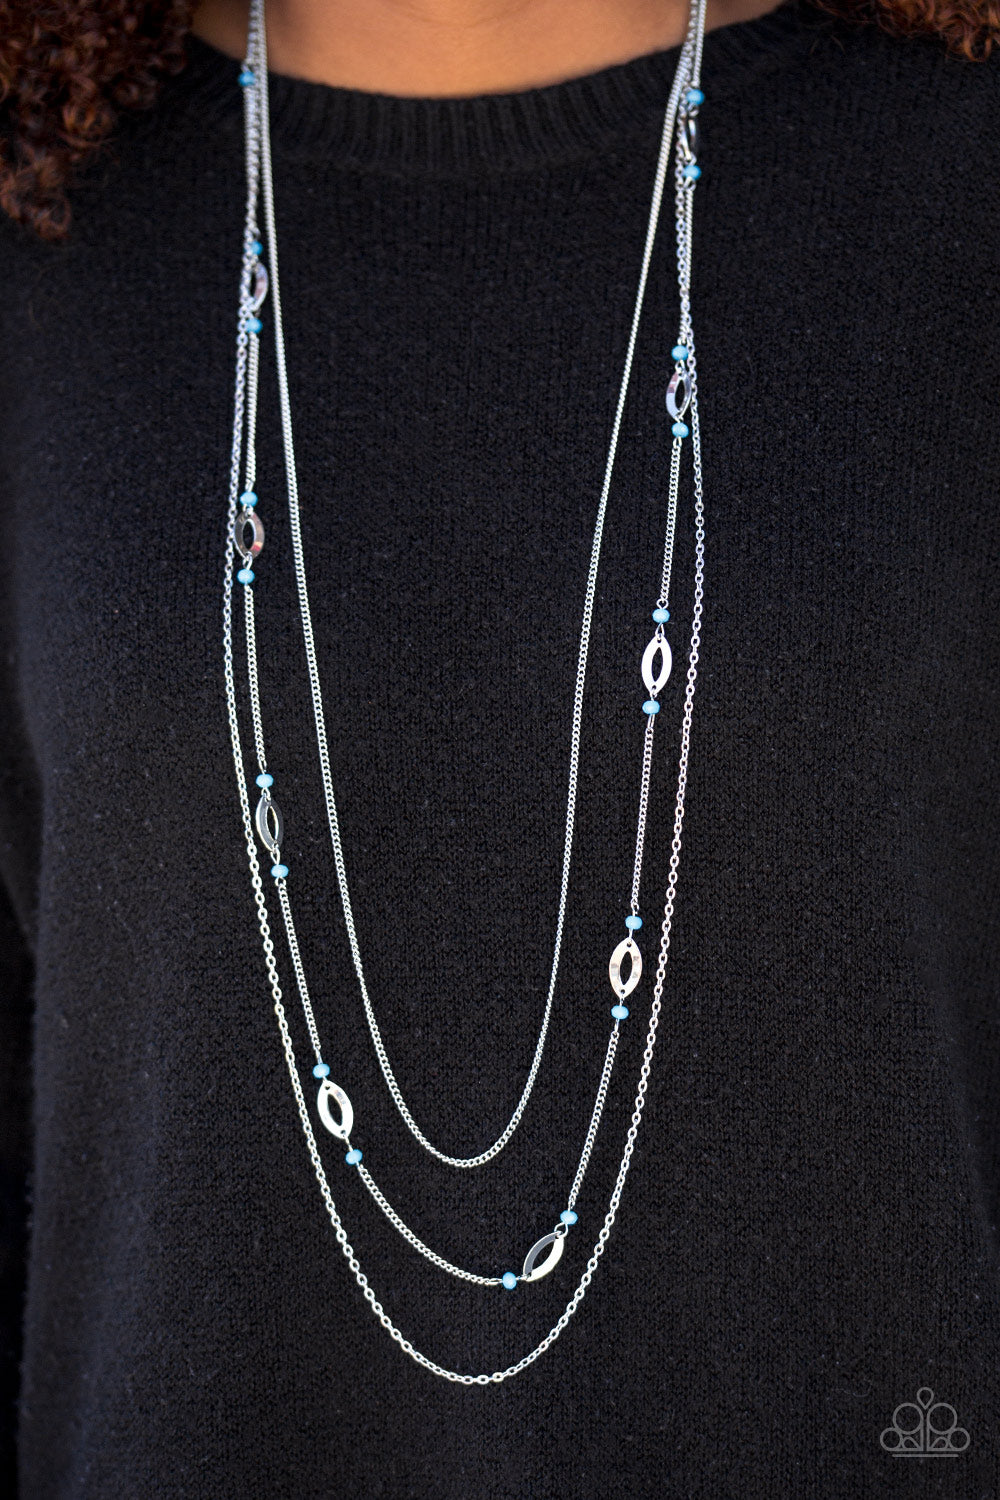 Afternoon Glow - blue - Paparazzi necklace